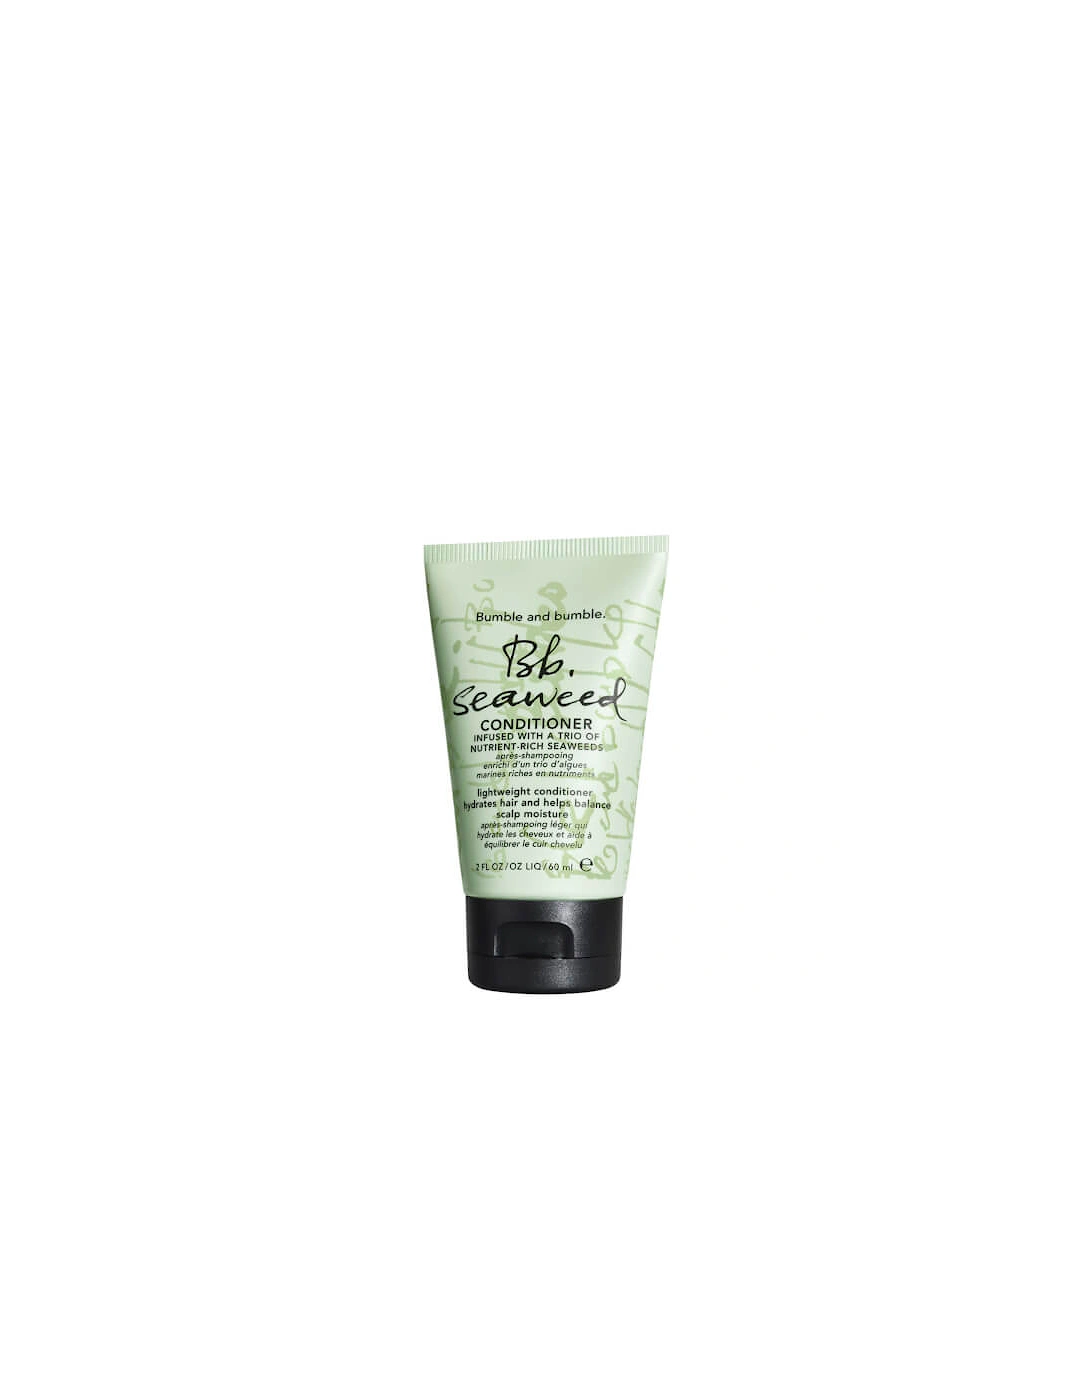 Bumble and bumble Seaweed Conditioner 60ml, 2 of 1